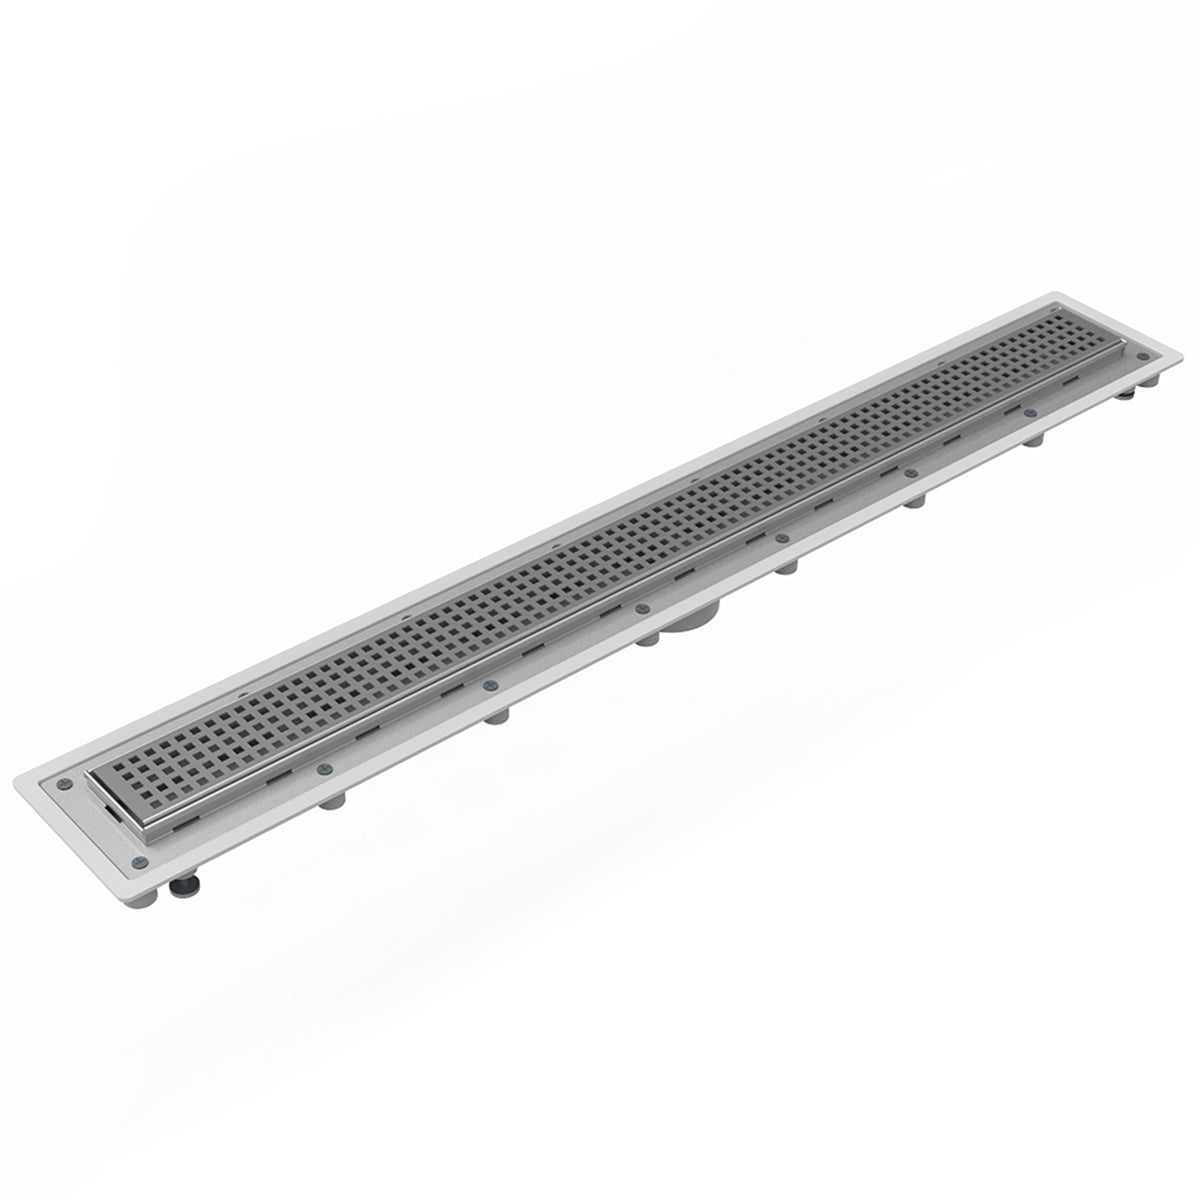 Infinity Drain 54" Universal Infinity Linear Drain Kit with PVC Channel and Squares Pattern Grate